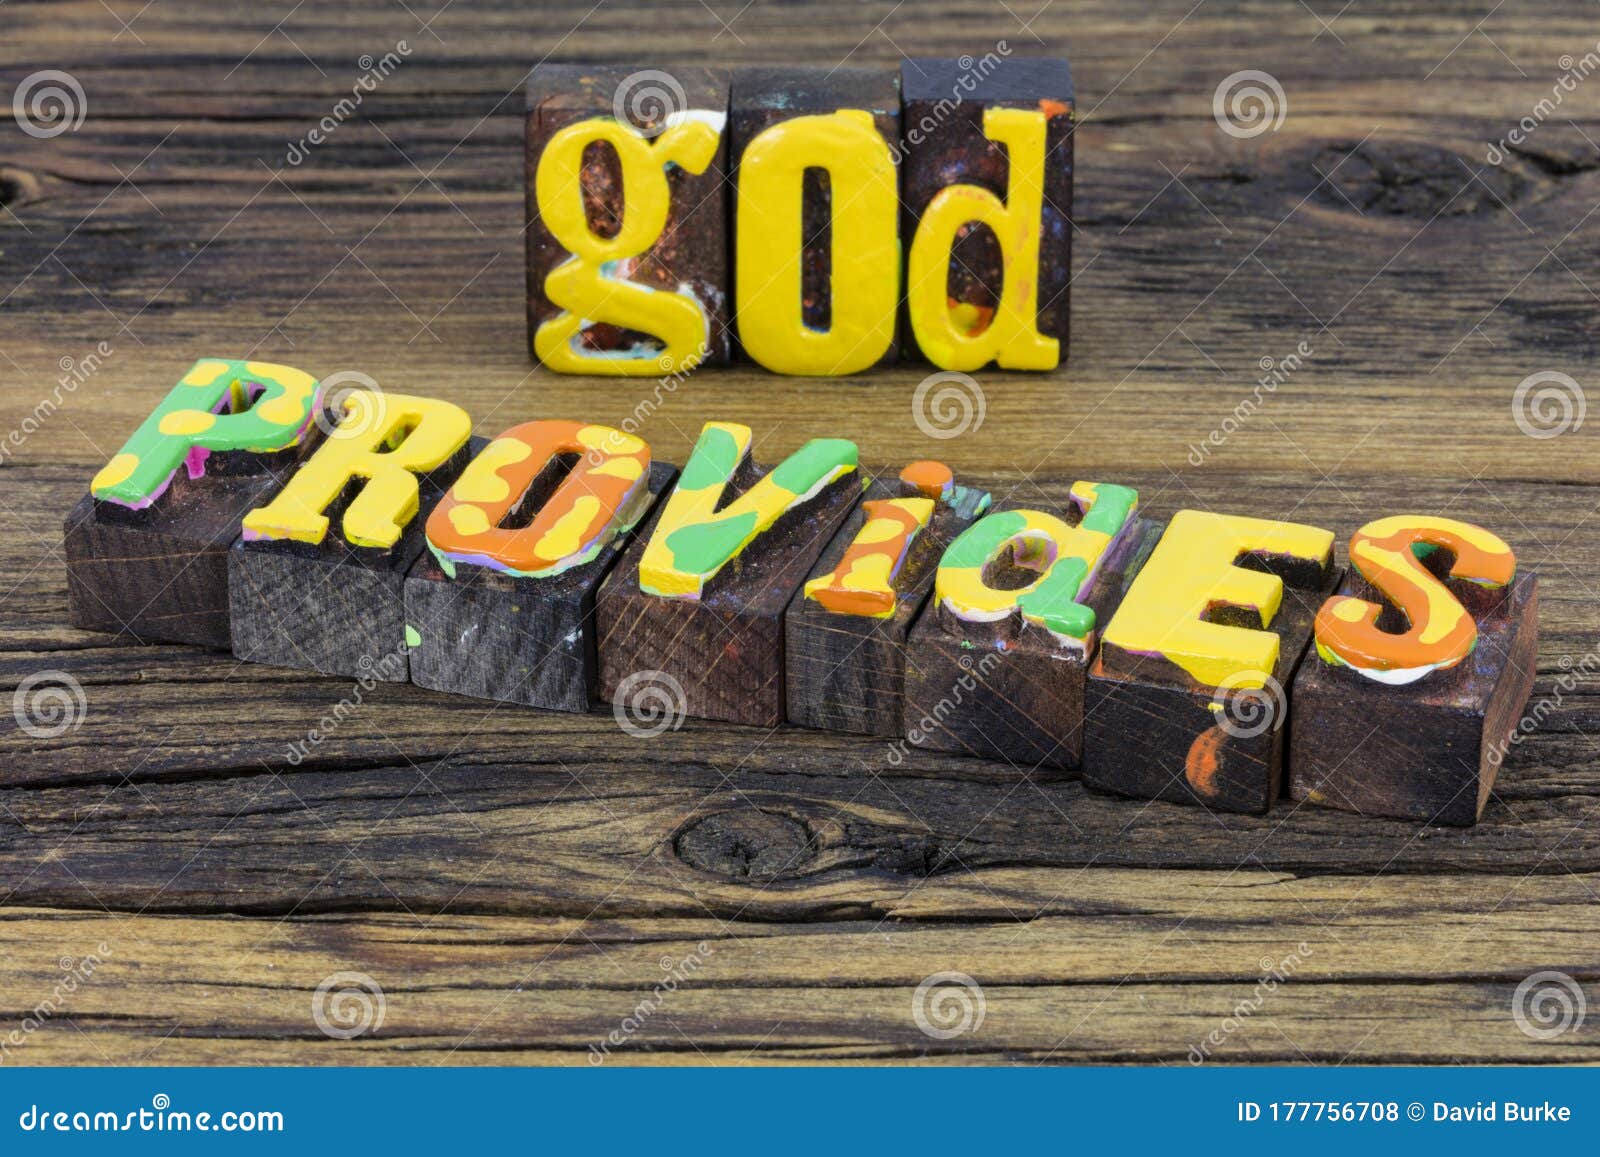 god provides food shelter guidance rescue mission believe lord